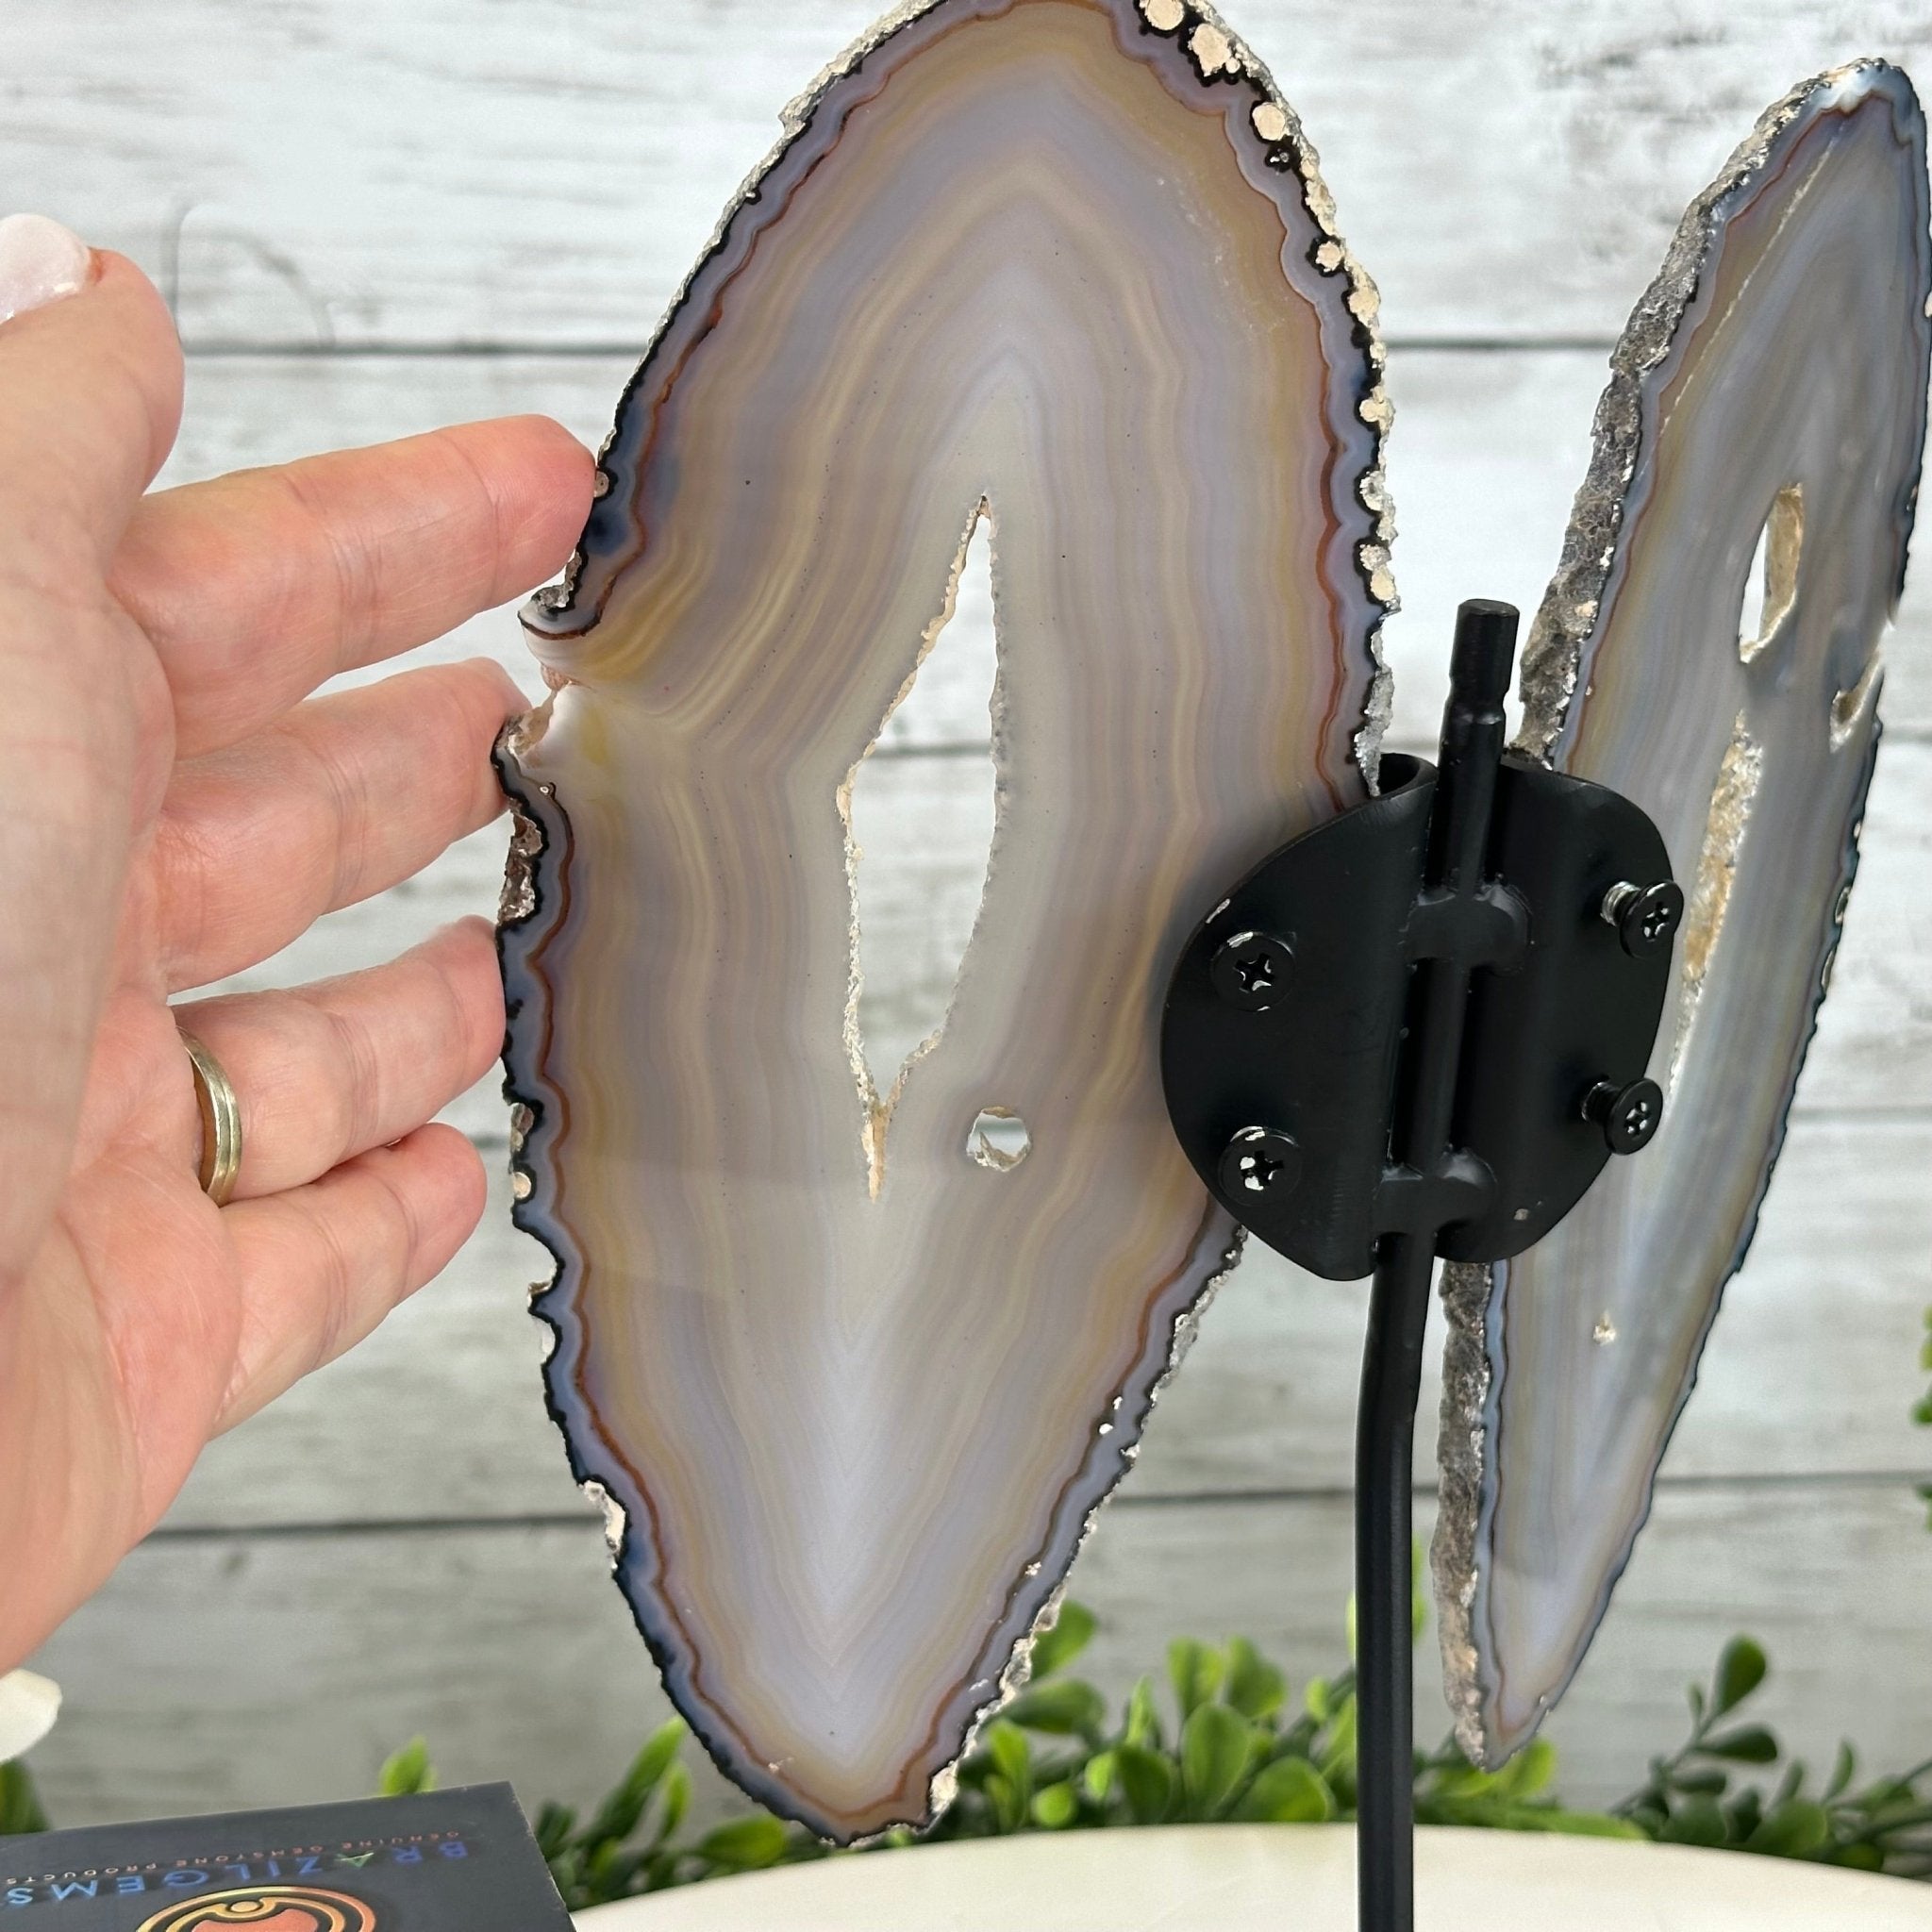 Natural Brazilian Agate "Butterfly Wings", 10.7" Tall #5050NA-117 - Brazil GemsBrazil GemsNatural Brazilian Agate "Butterfly Wings", 10.7" Tall #5050NA-117Agate Butterfly Wings5050NA-117